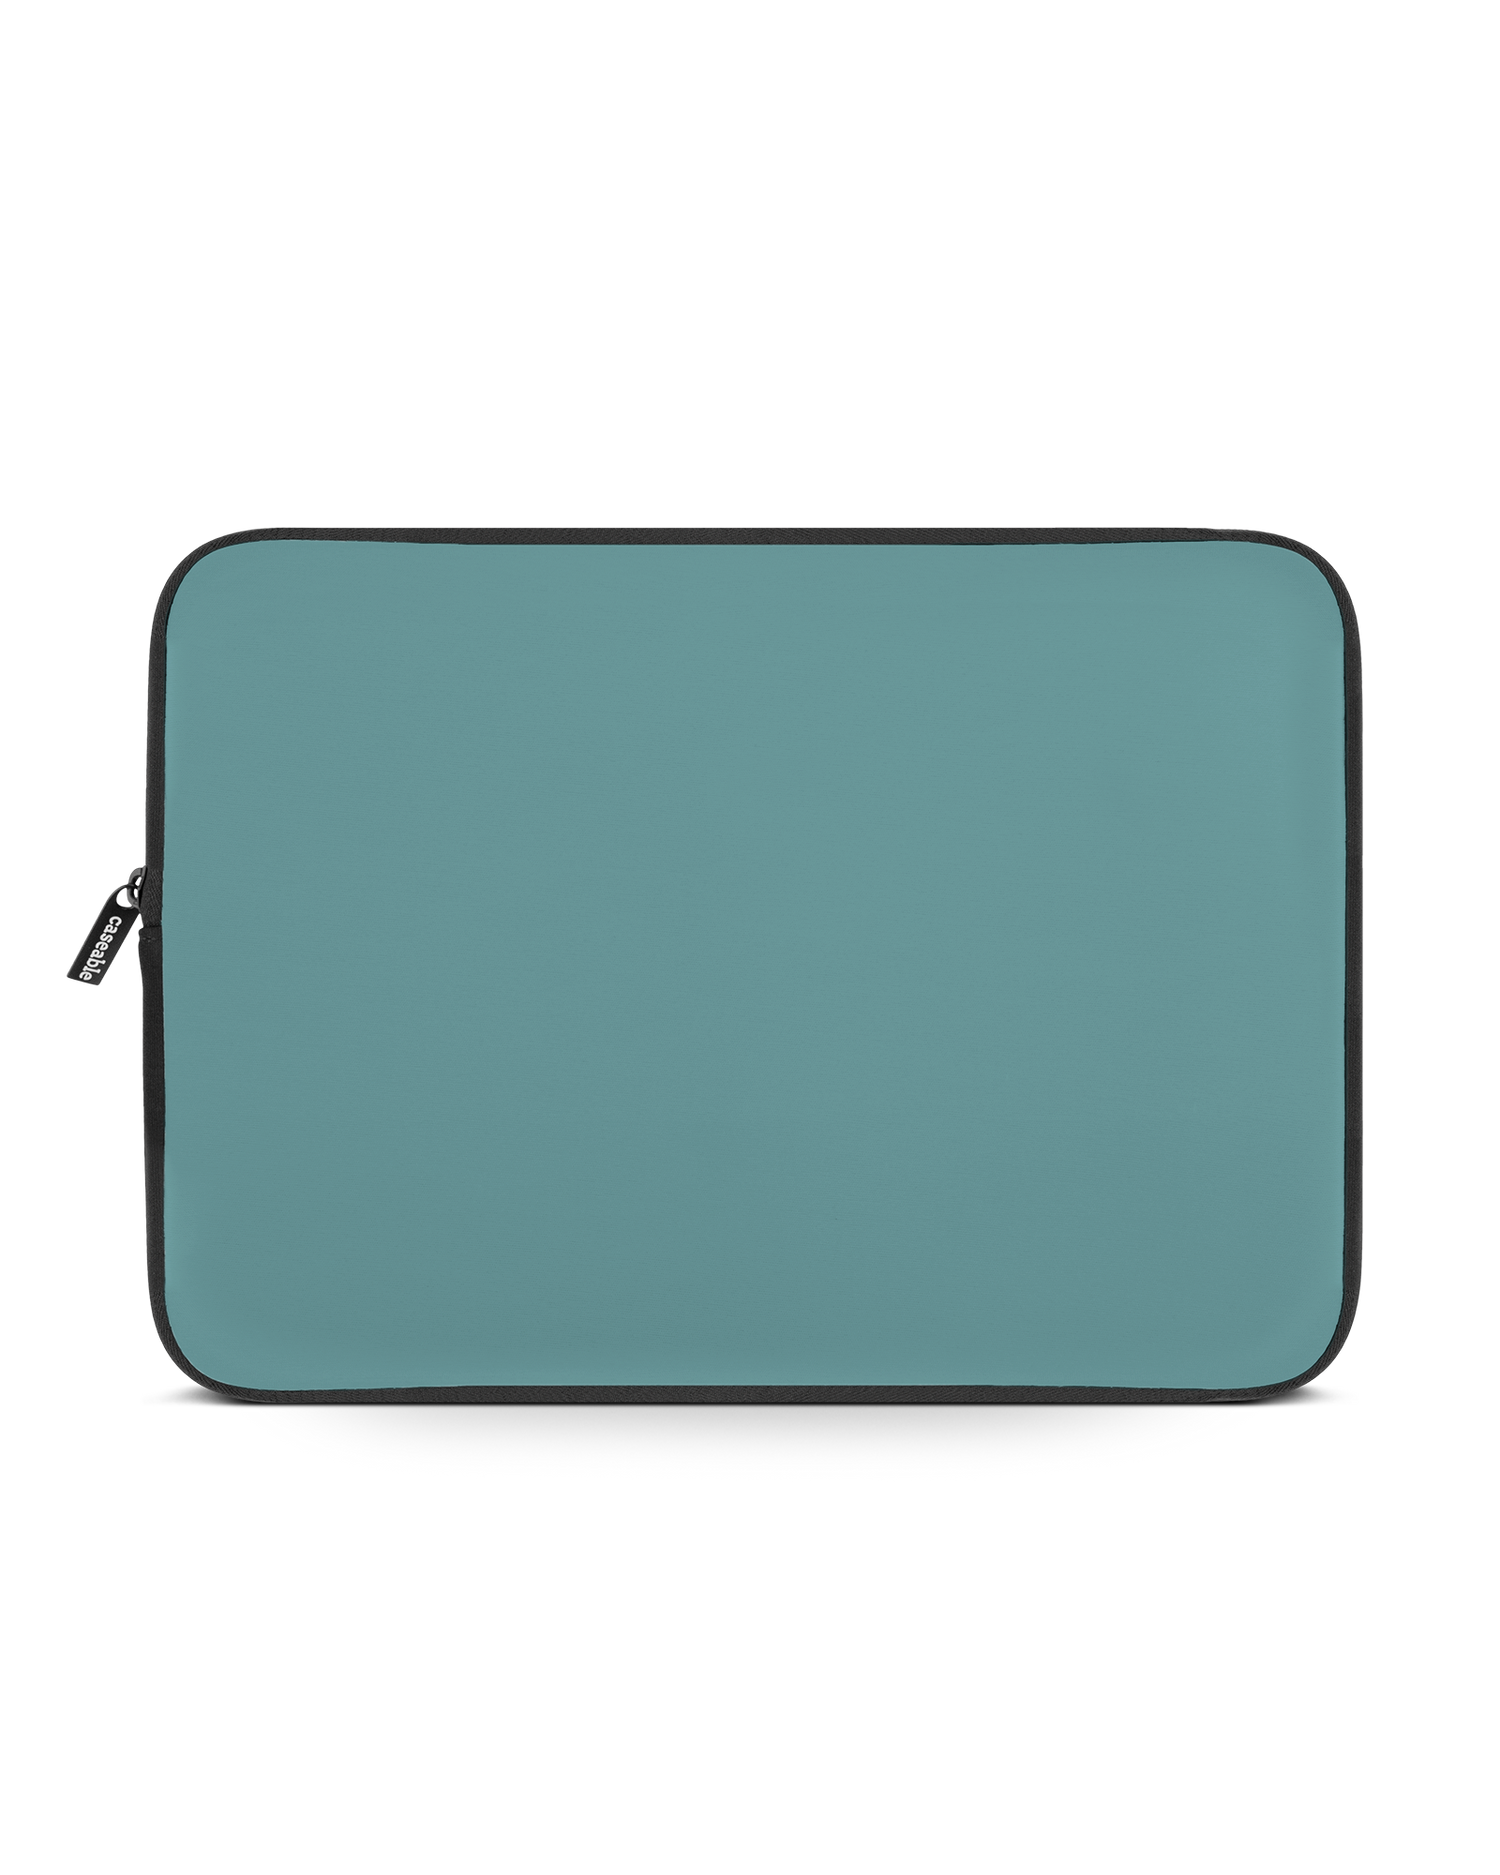 TURQUOISE Laptop Case 14-15 inch: Front View